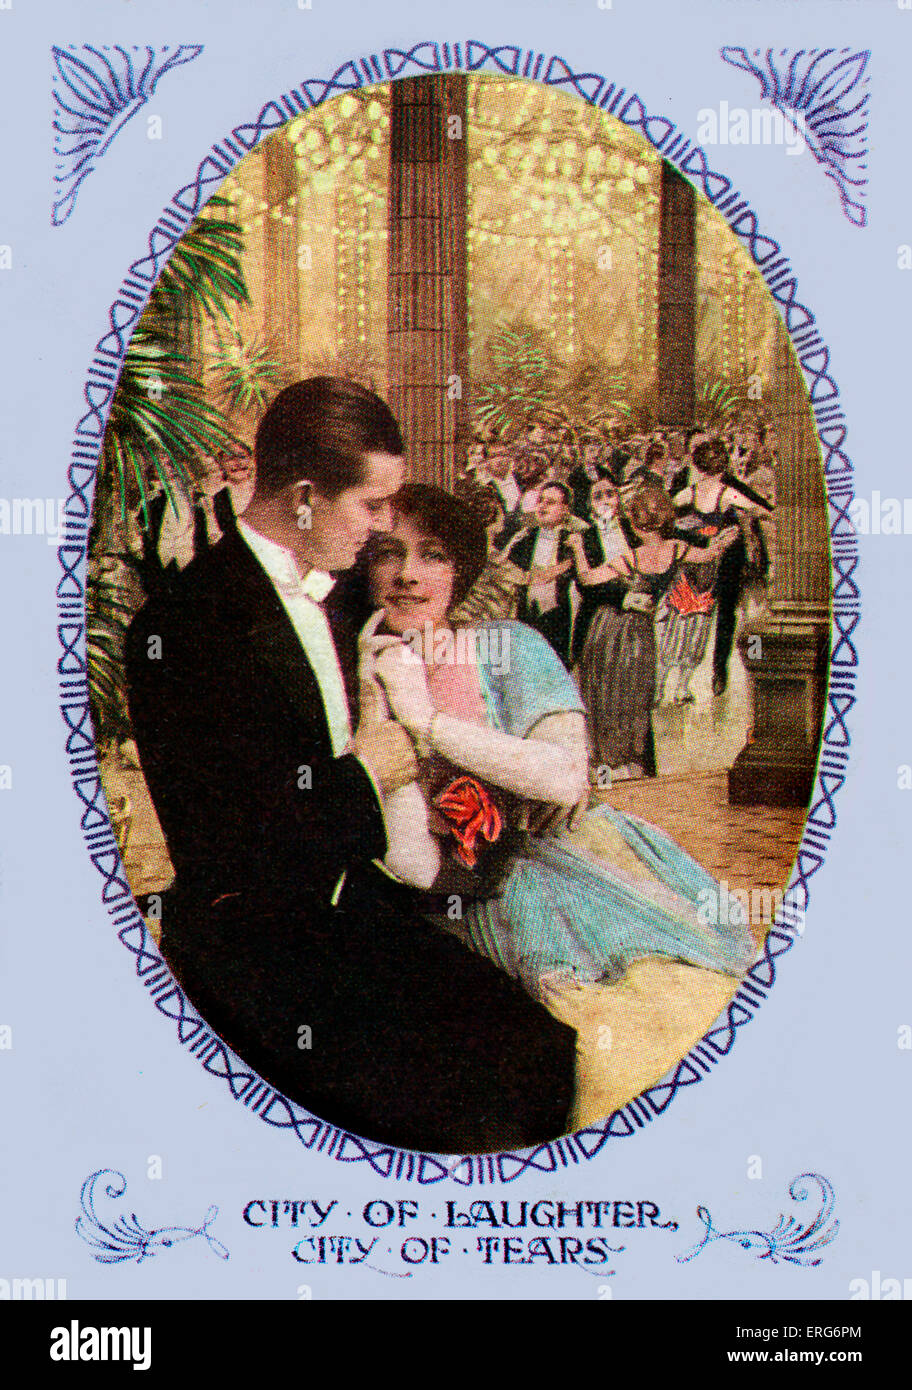 City of Laughter, City of Tears - Postcard featuring the song. Words by Worton David, c. 1920.   Lyrics on back:  'City of Stock Photo